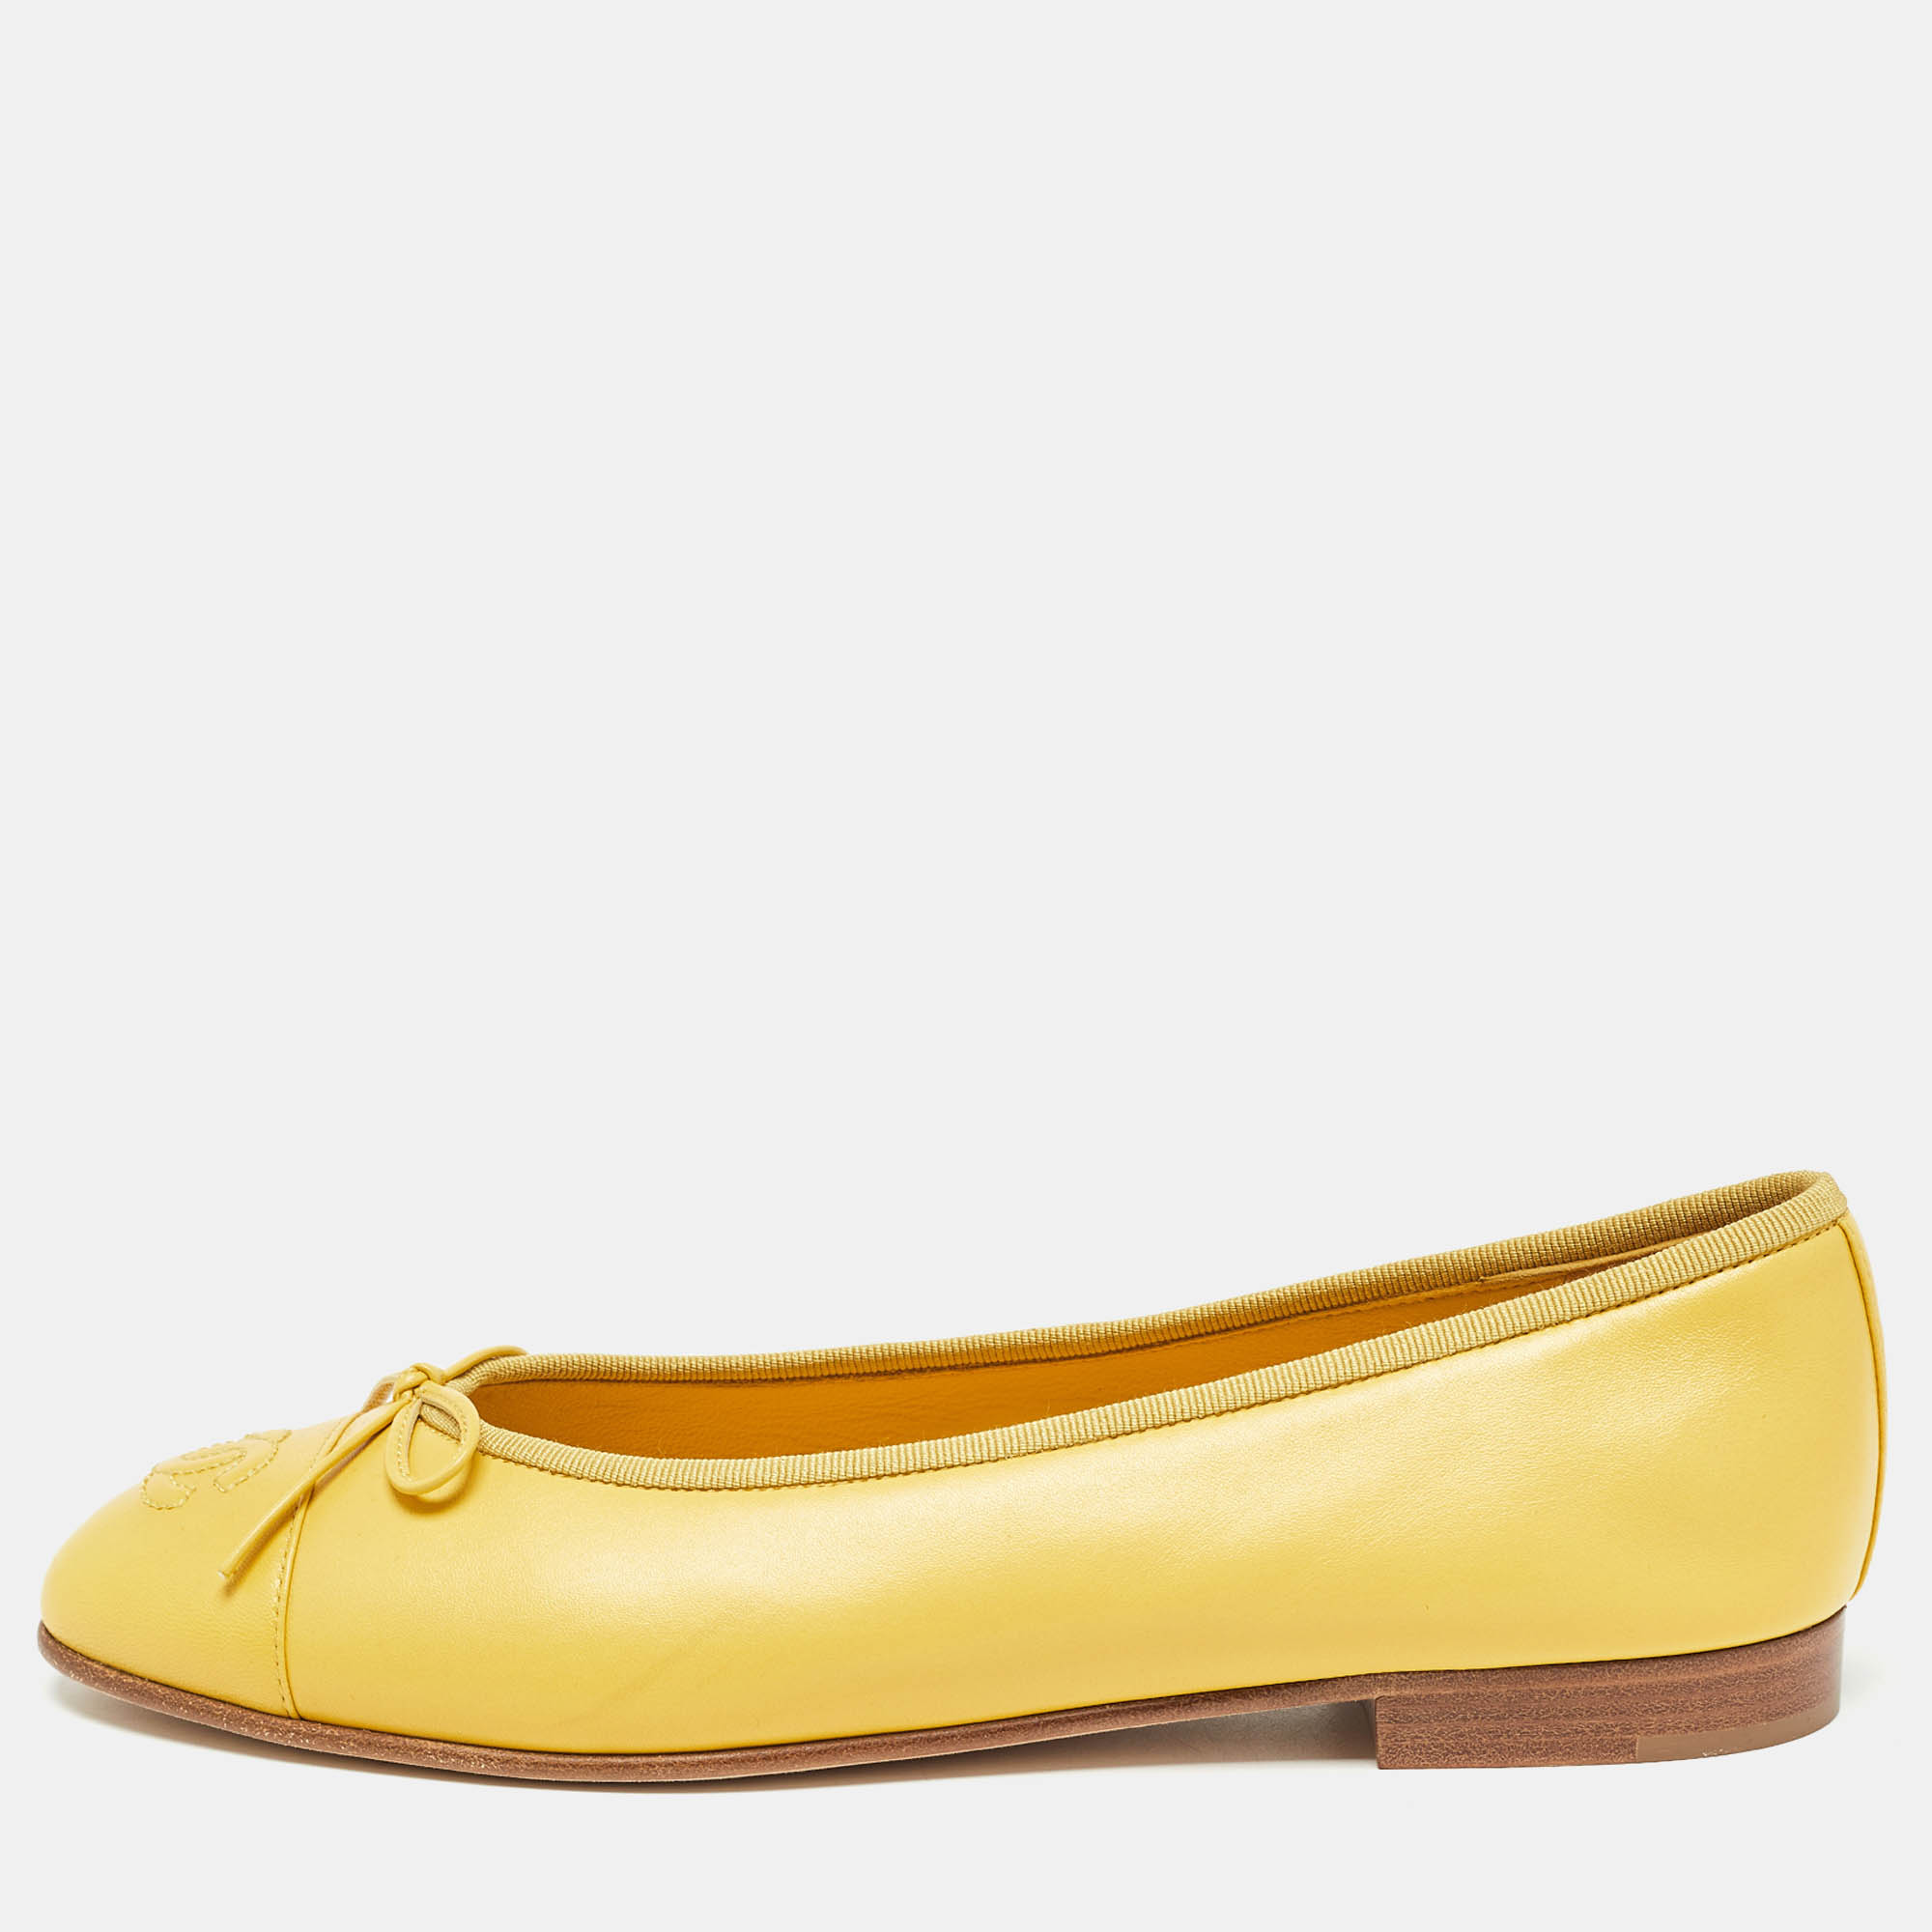 Pre-owned Chanel Yellow Leather Cc Bow Ballet Flats Size 38.5